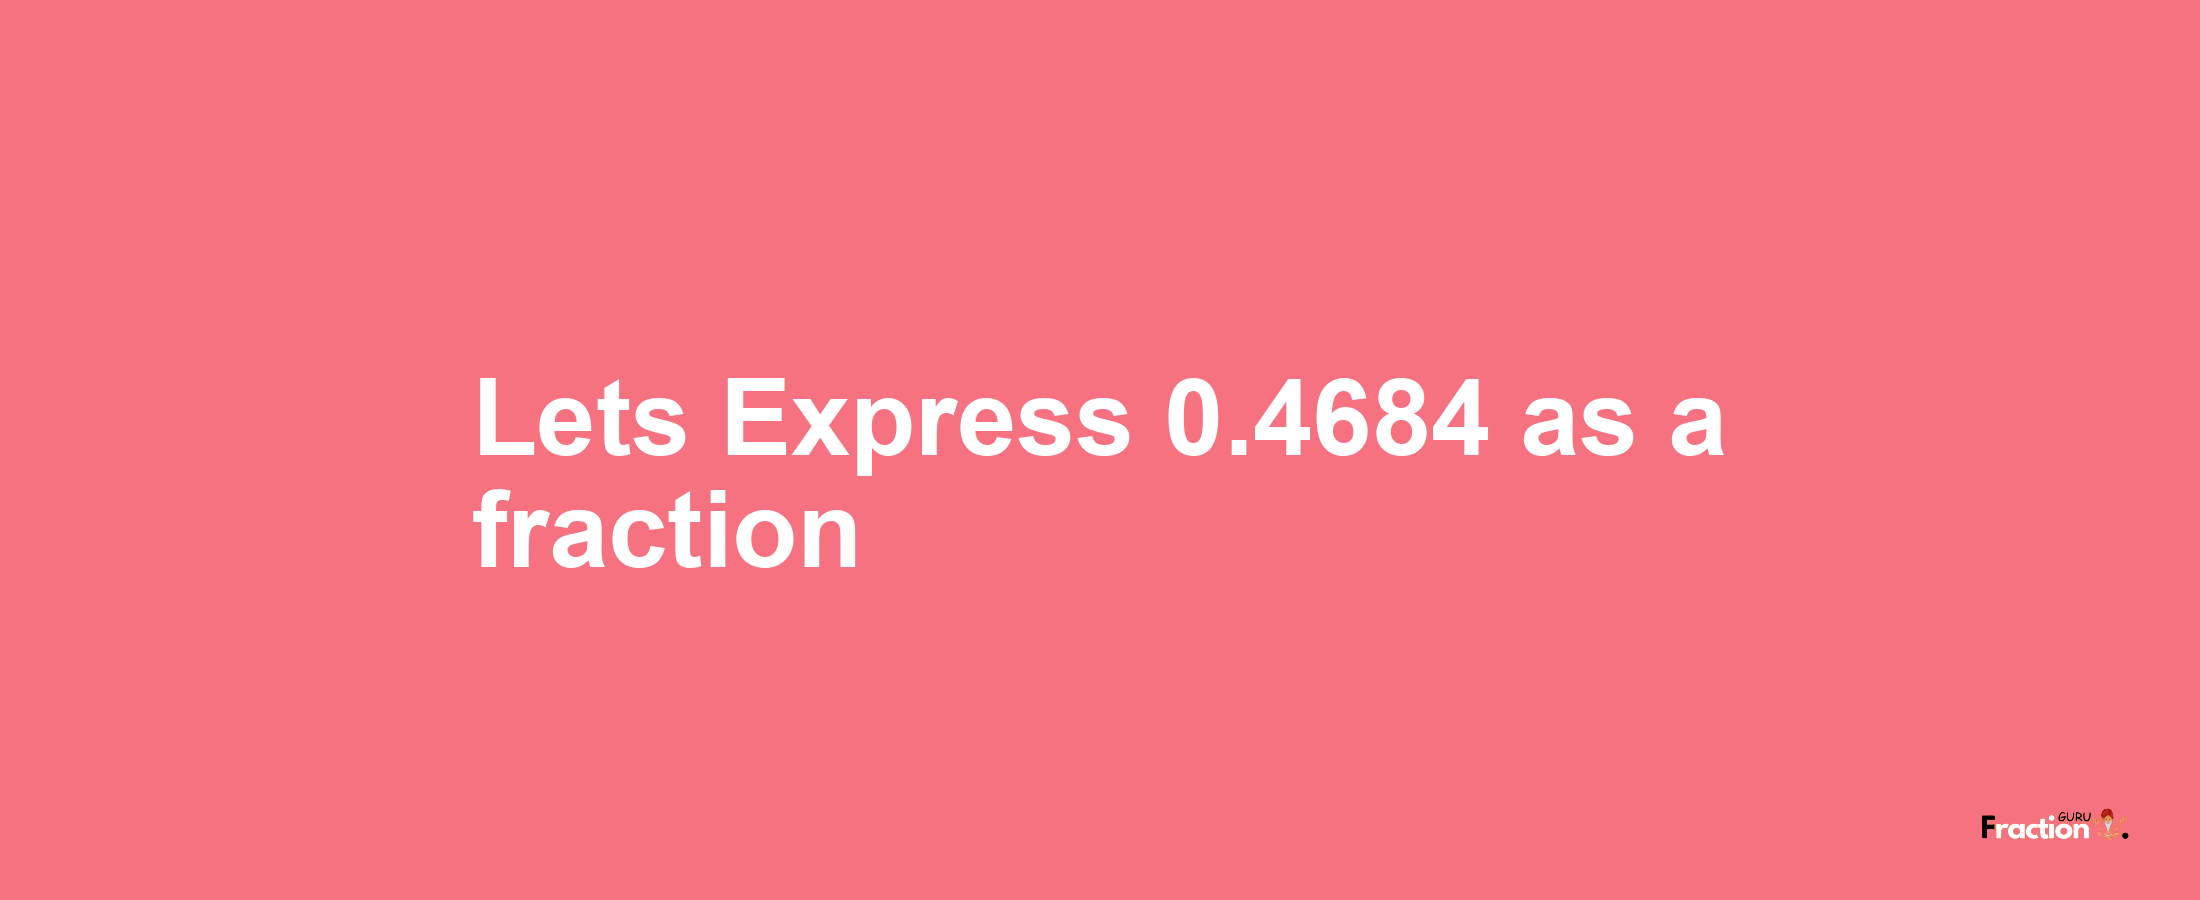 Lets Express 0.4684 as afraction